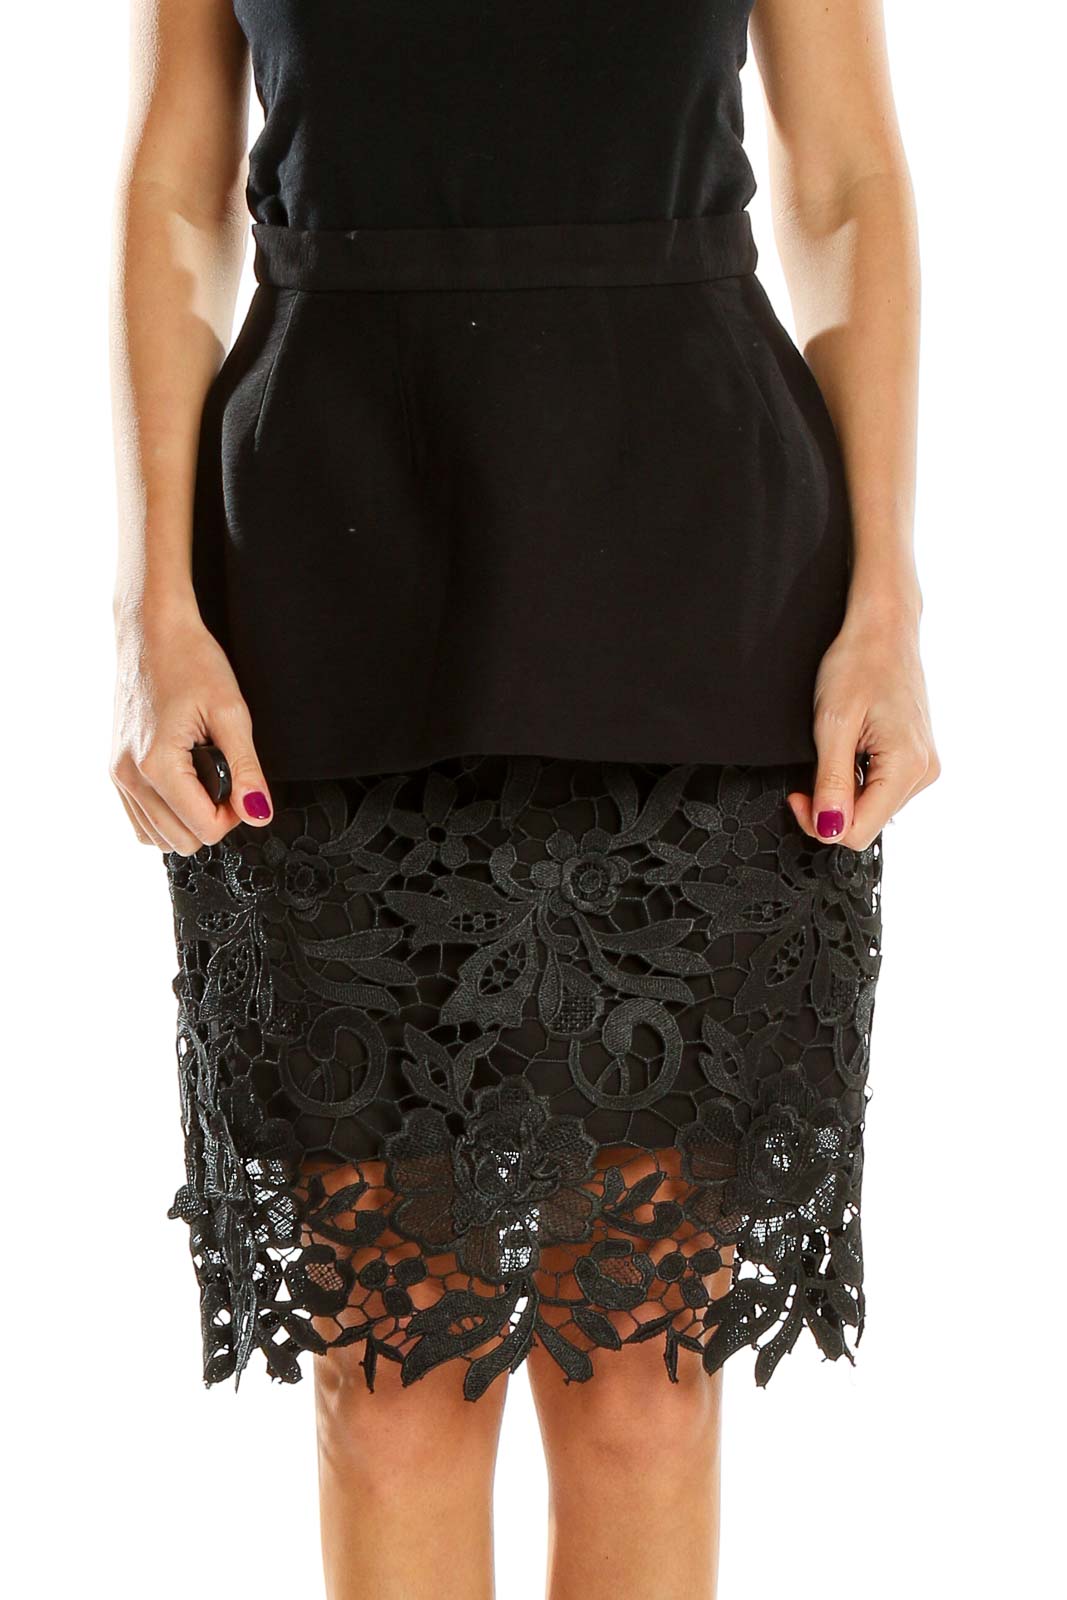 Black Lace Chic Pencil Skirt Front